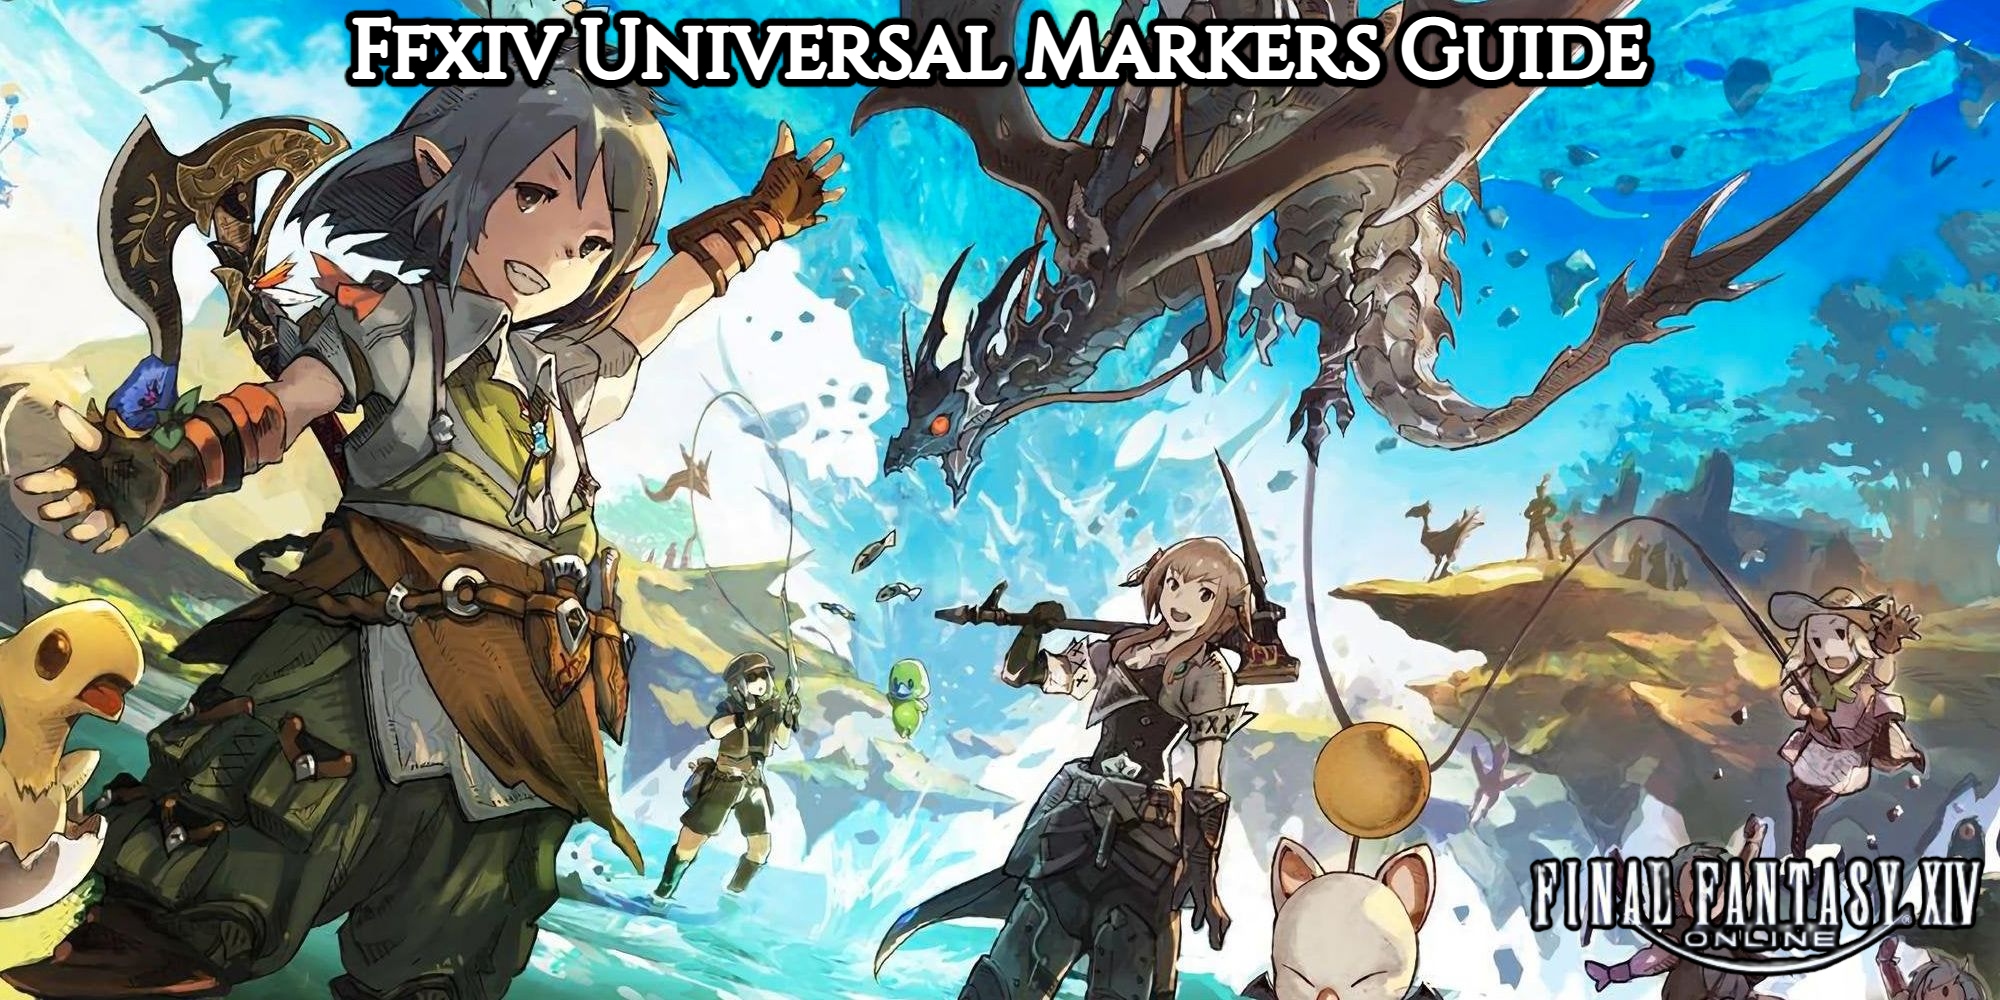 You are currently viewing Ffxiv Universal Markers Guide